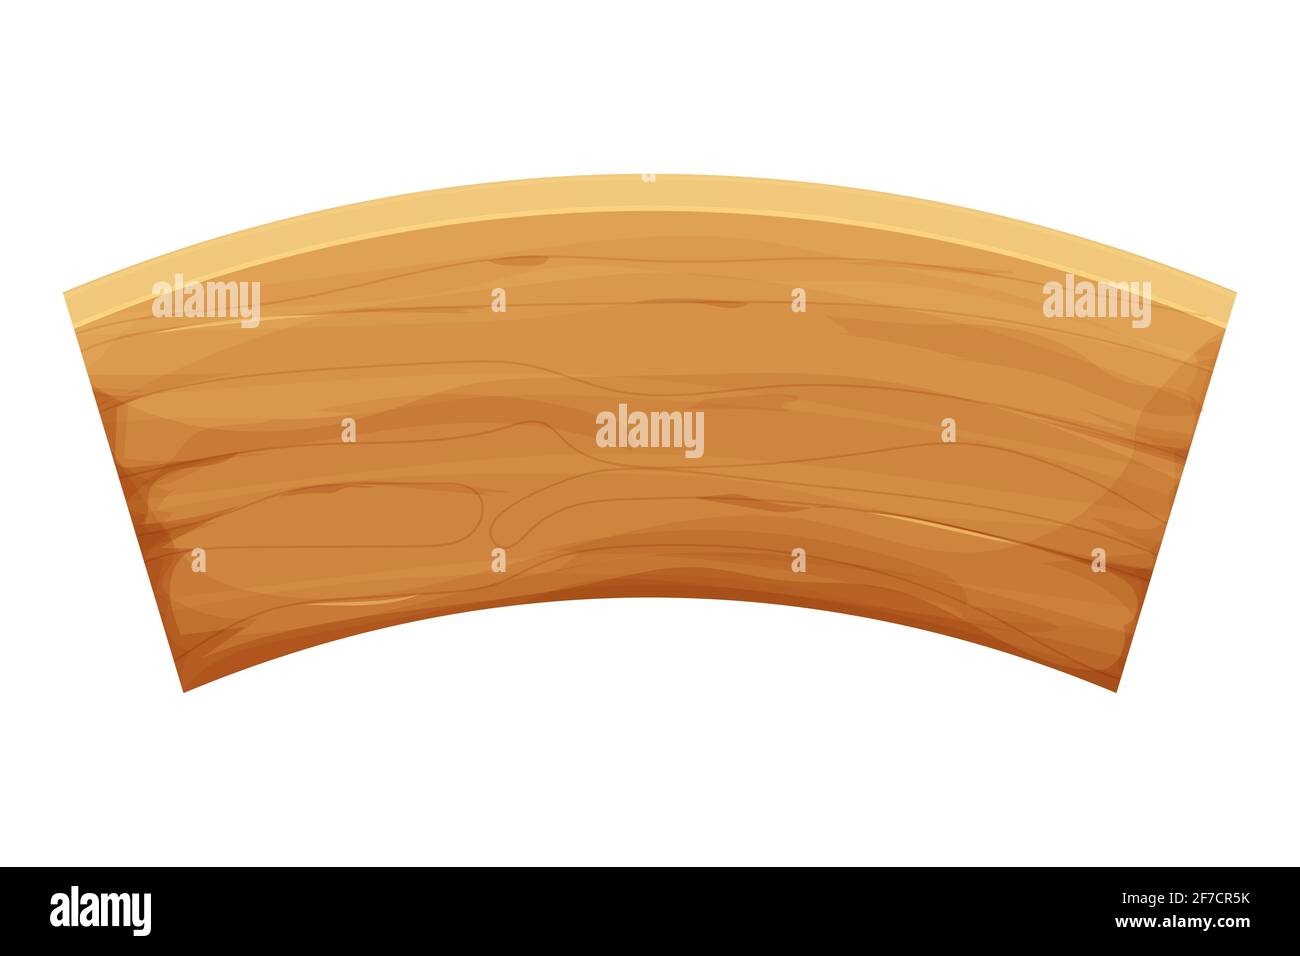 Wood banner, curved plank in cartoon style, empty, menu template isolated on white background stock vector illustration. Ui asset design, textured, detailed graphic object. . Stock Vector illustration Stock Vector